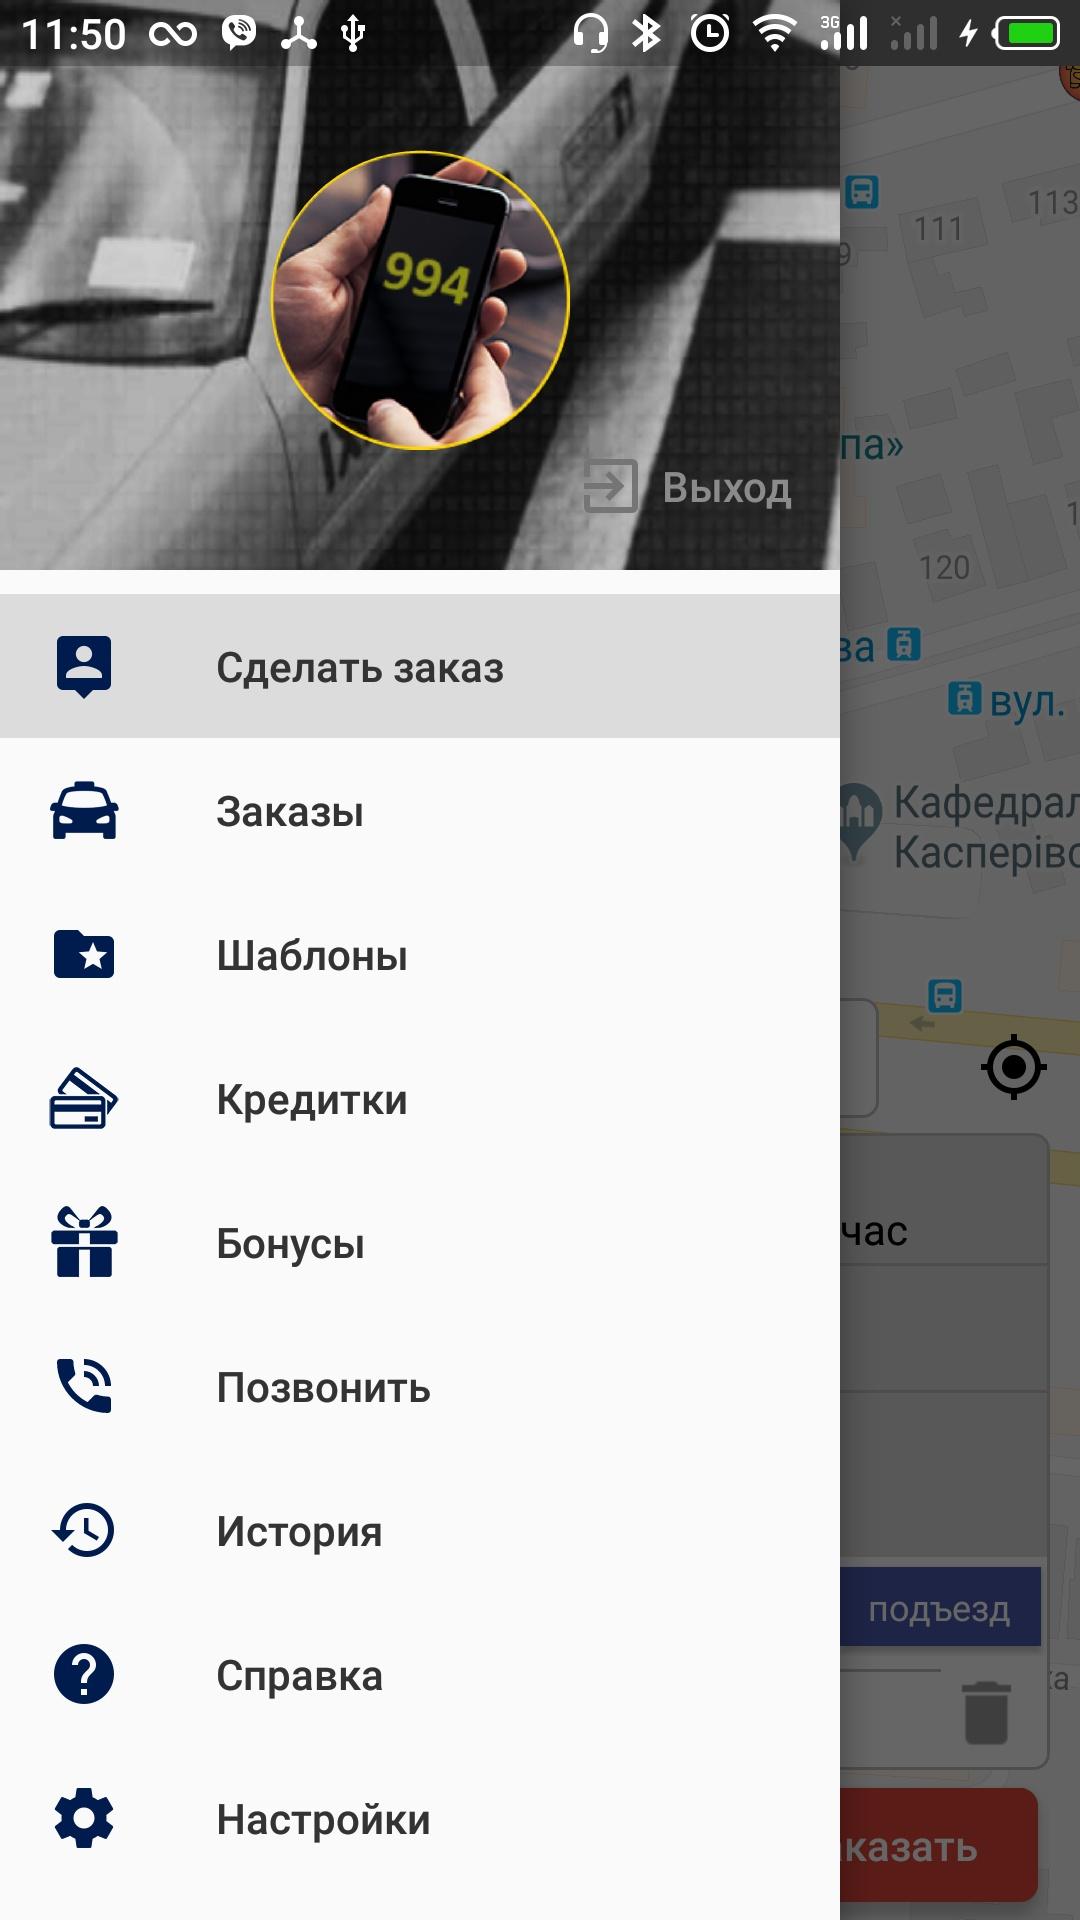 Android application Такси 994 screenshort